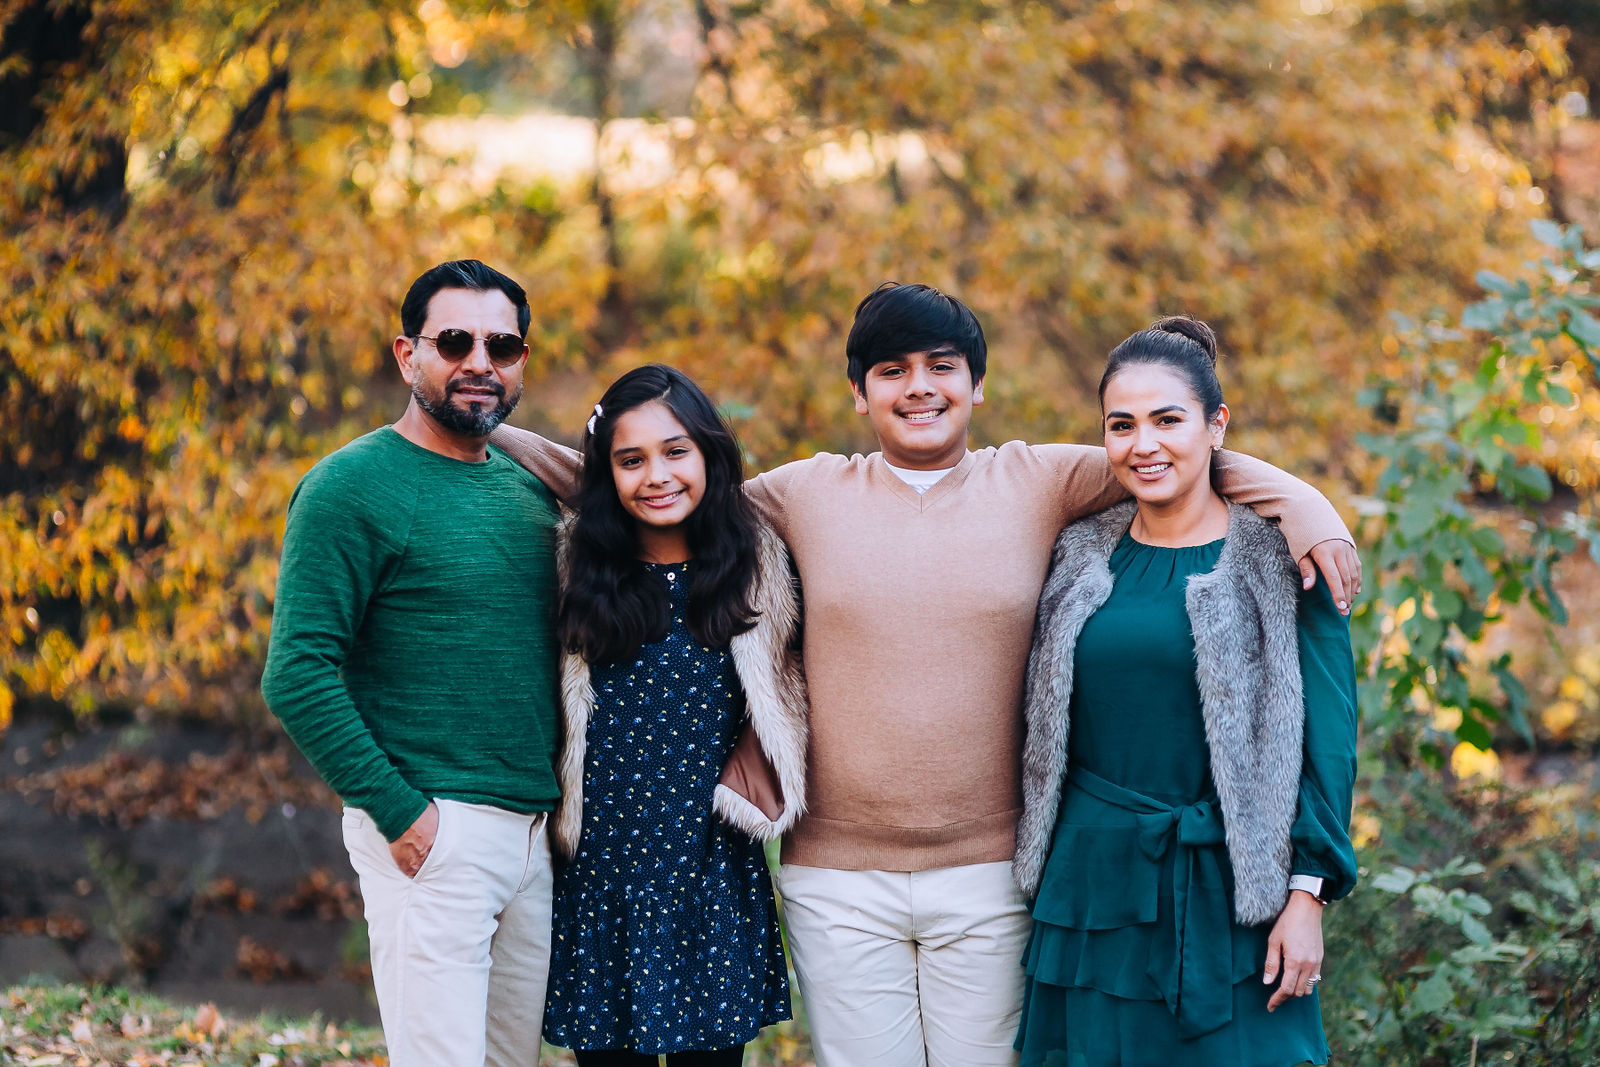 A picture of a family standing together in a park